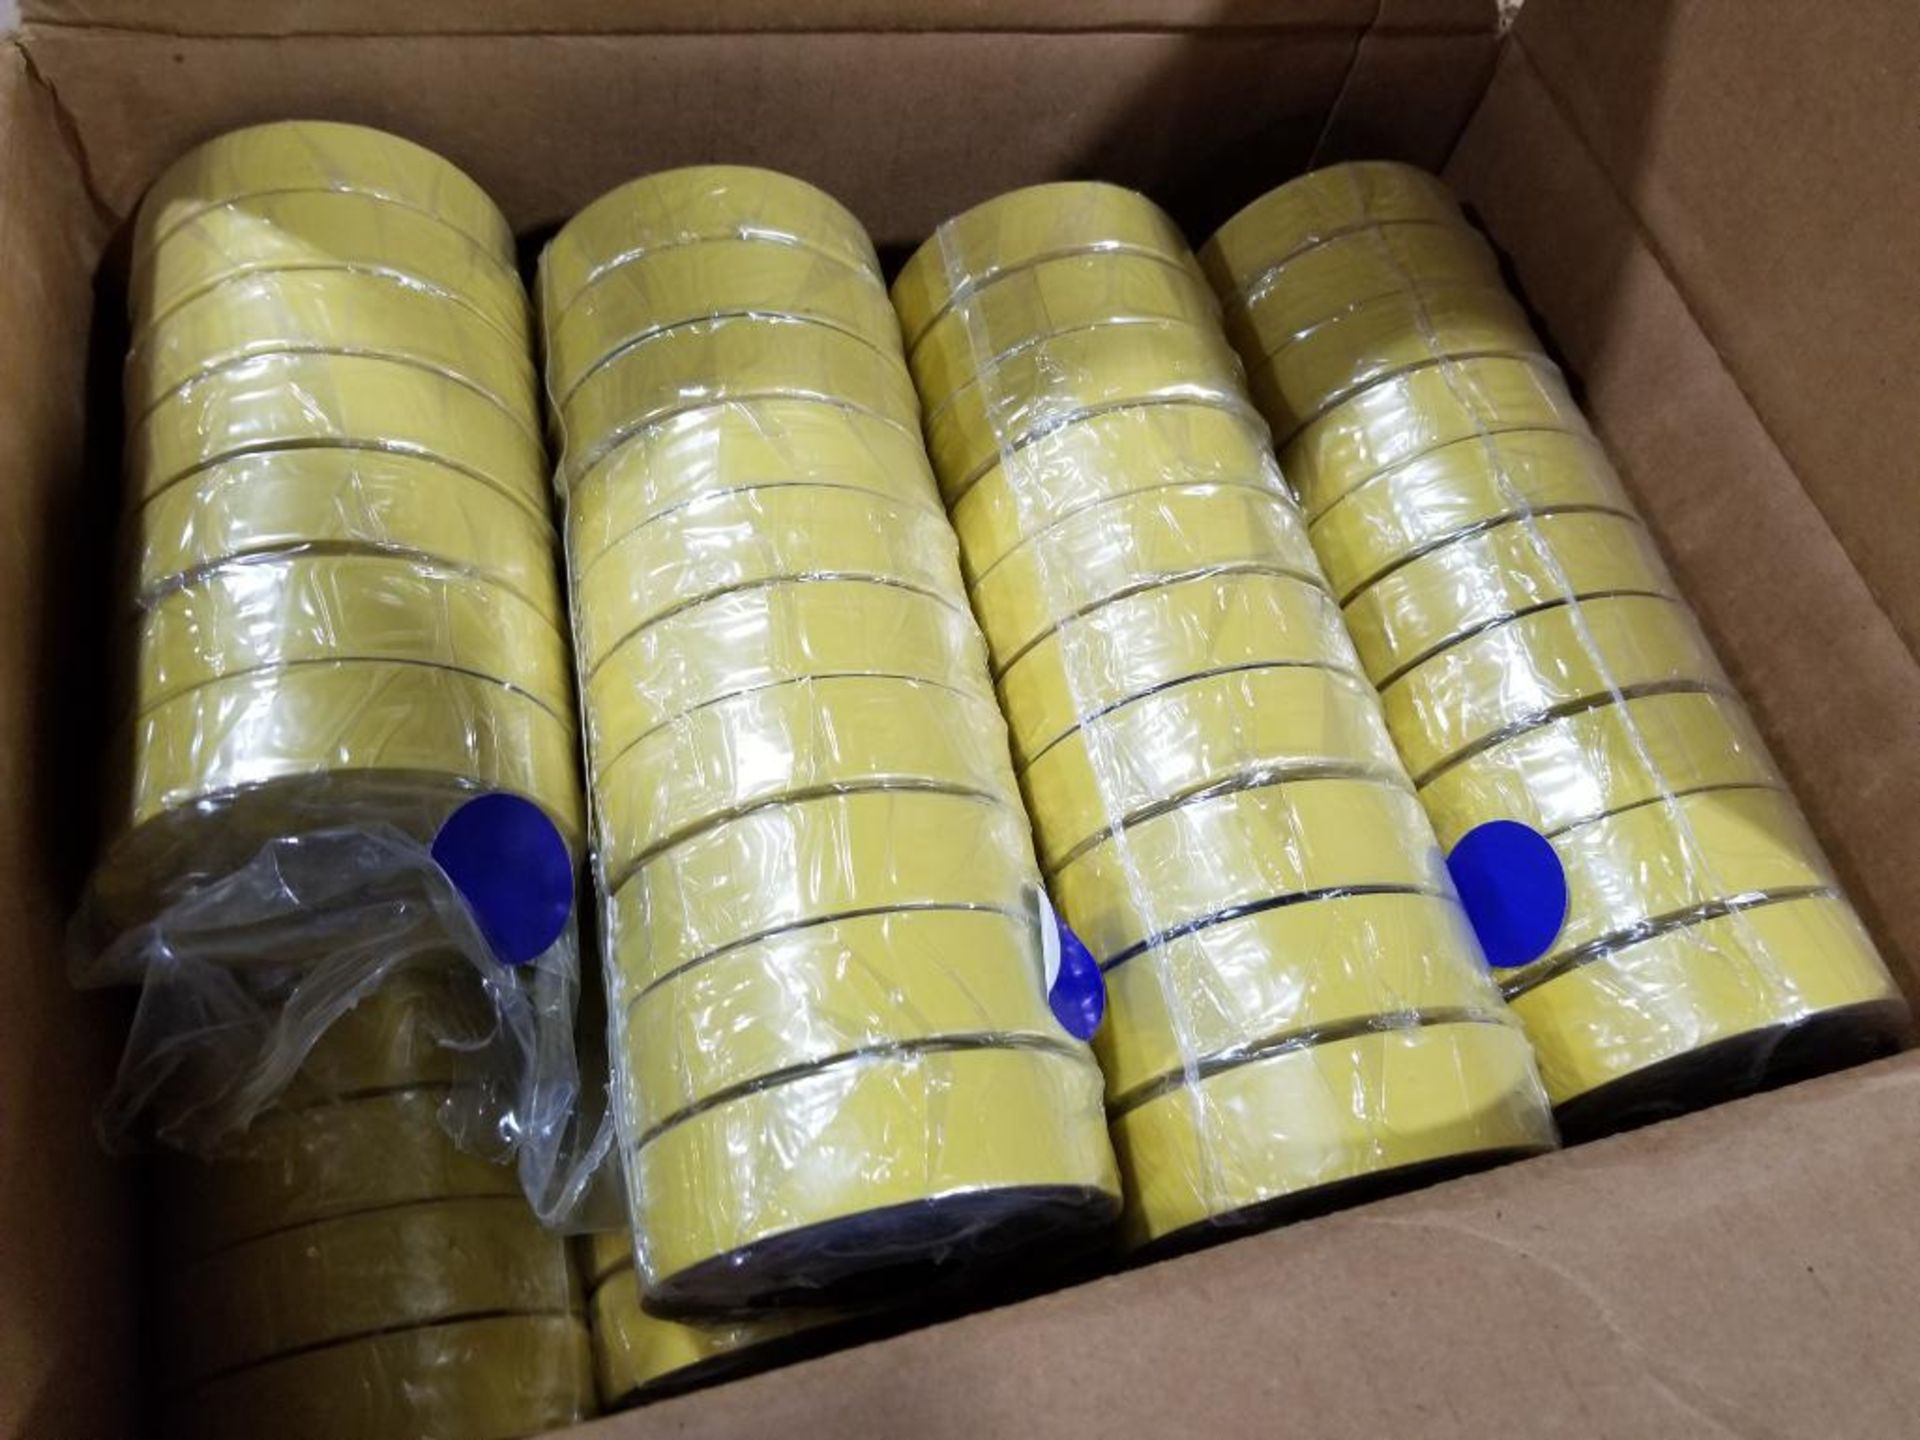 Uline yellow electrical tape. Part number S-6752. - Image 3 of 5